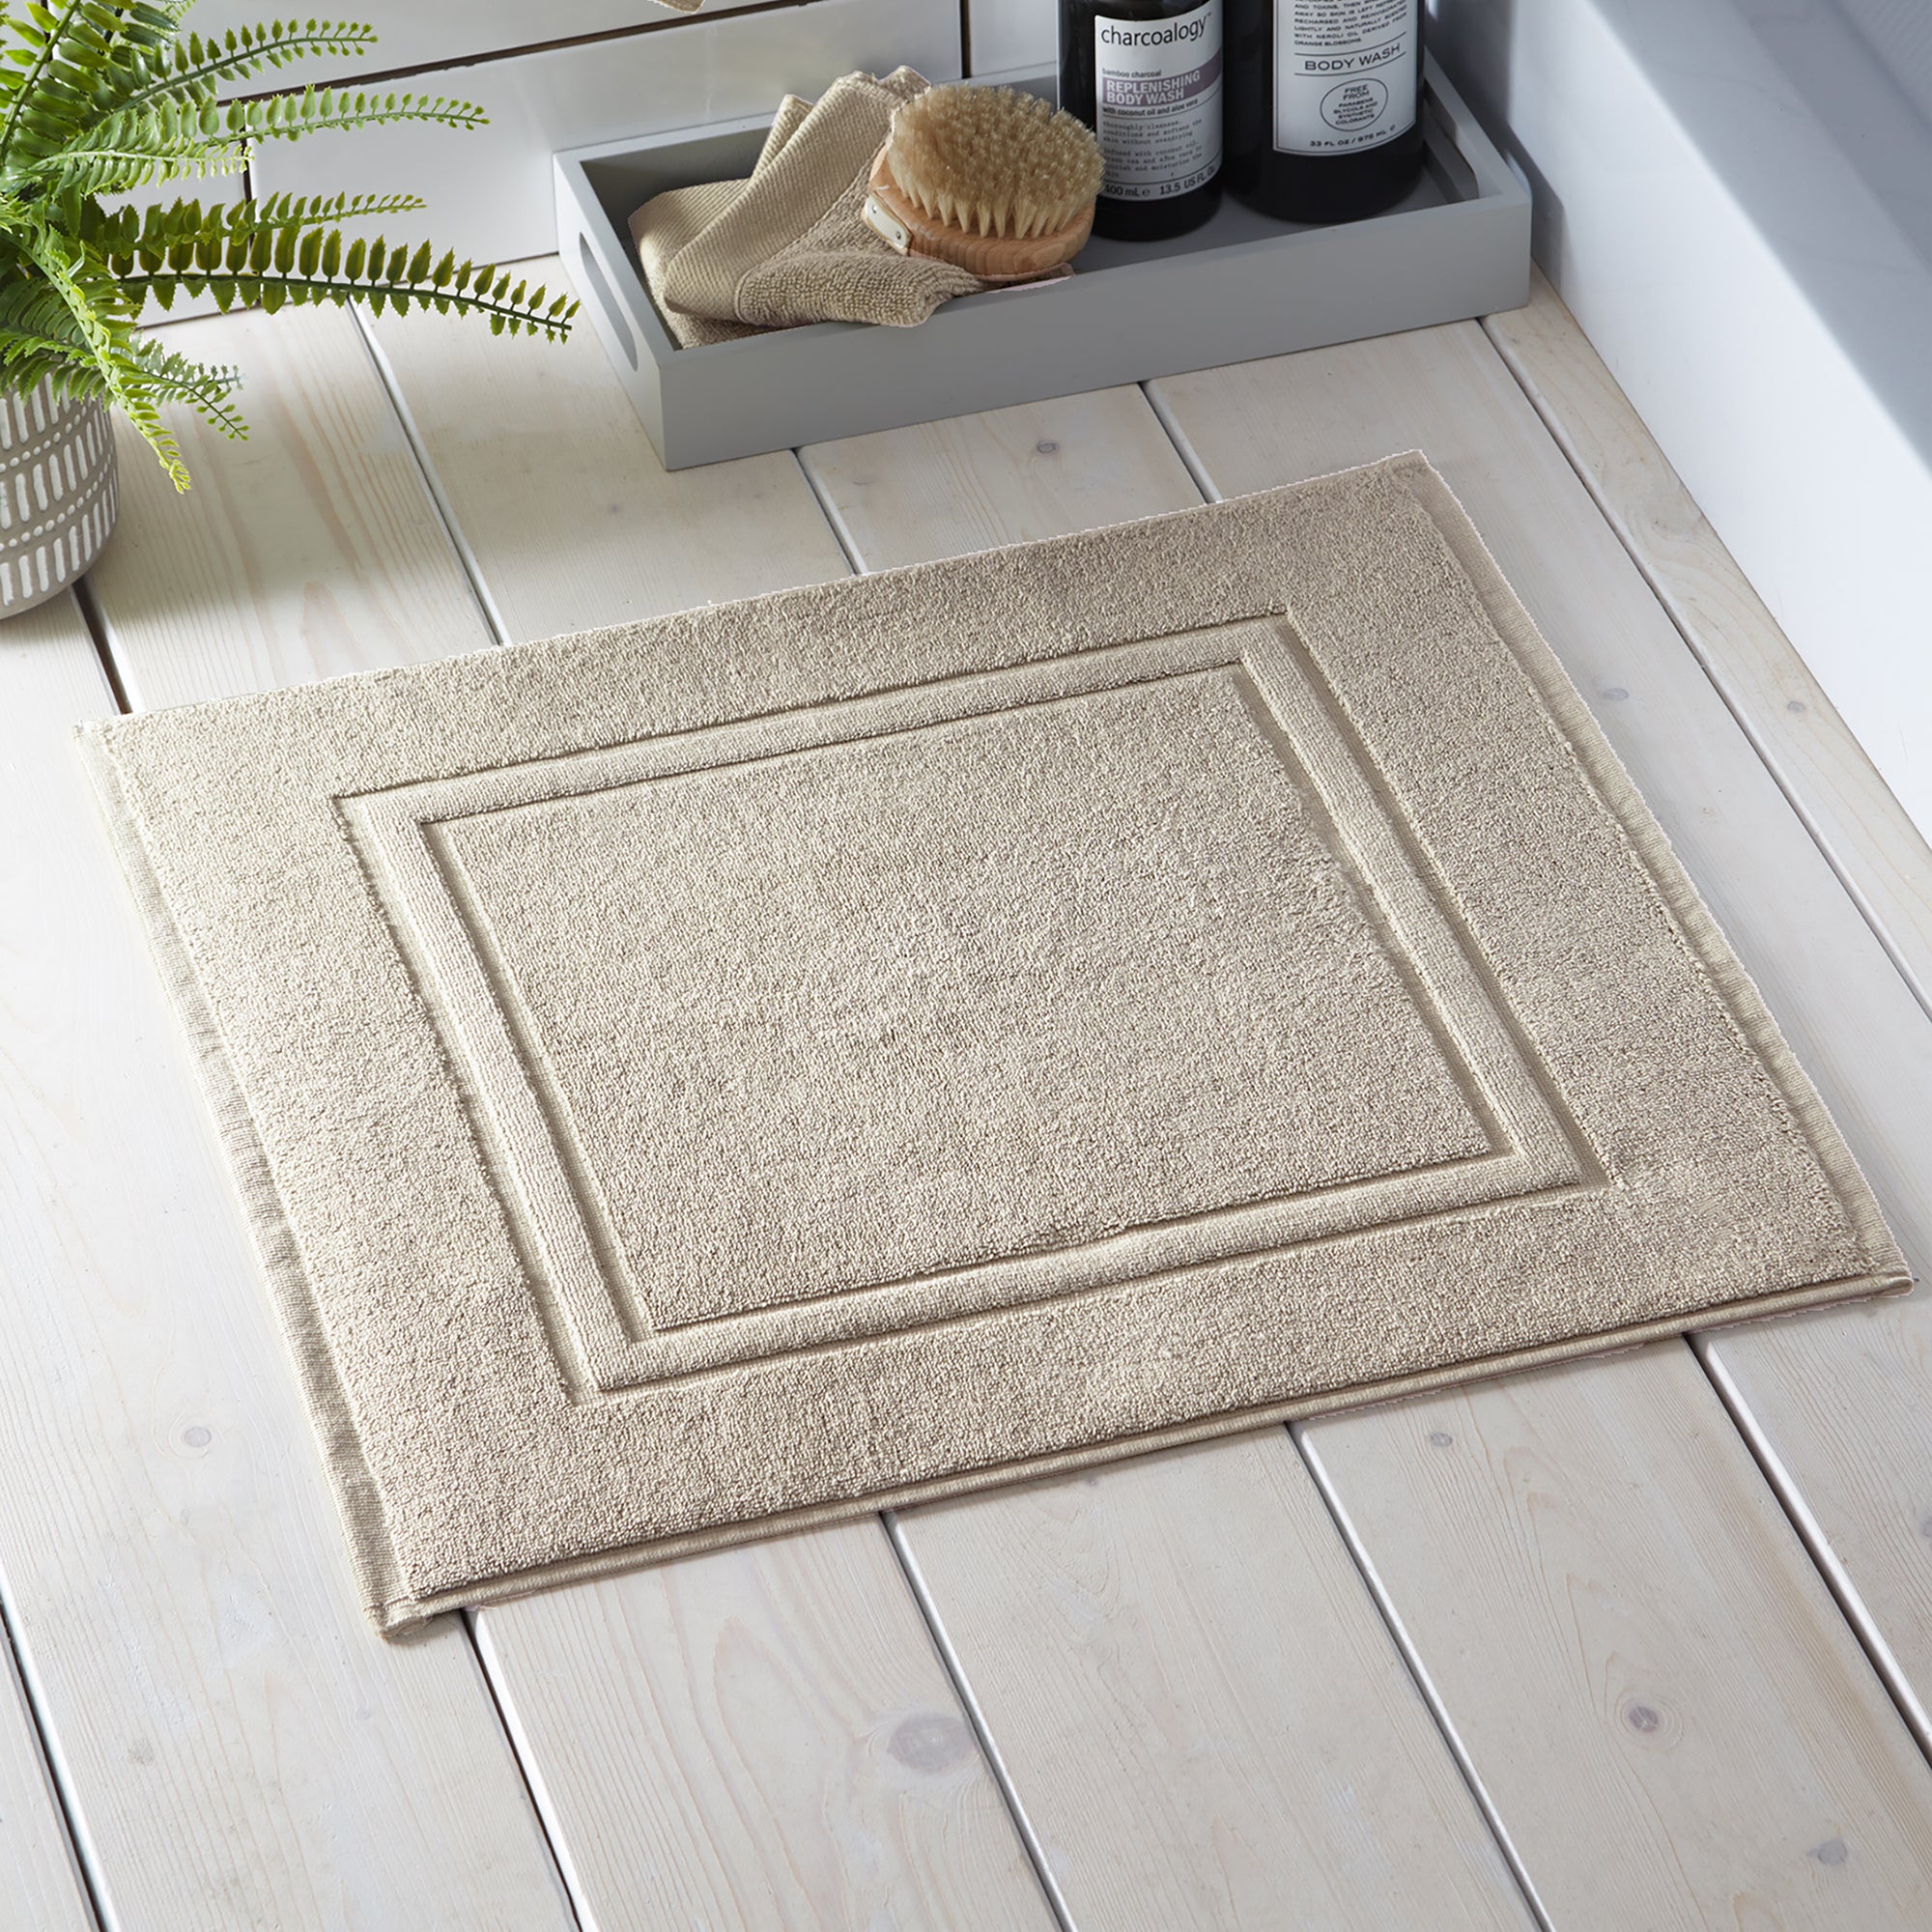 Shower Mat Abode Eco by Drift Home in Natural